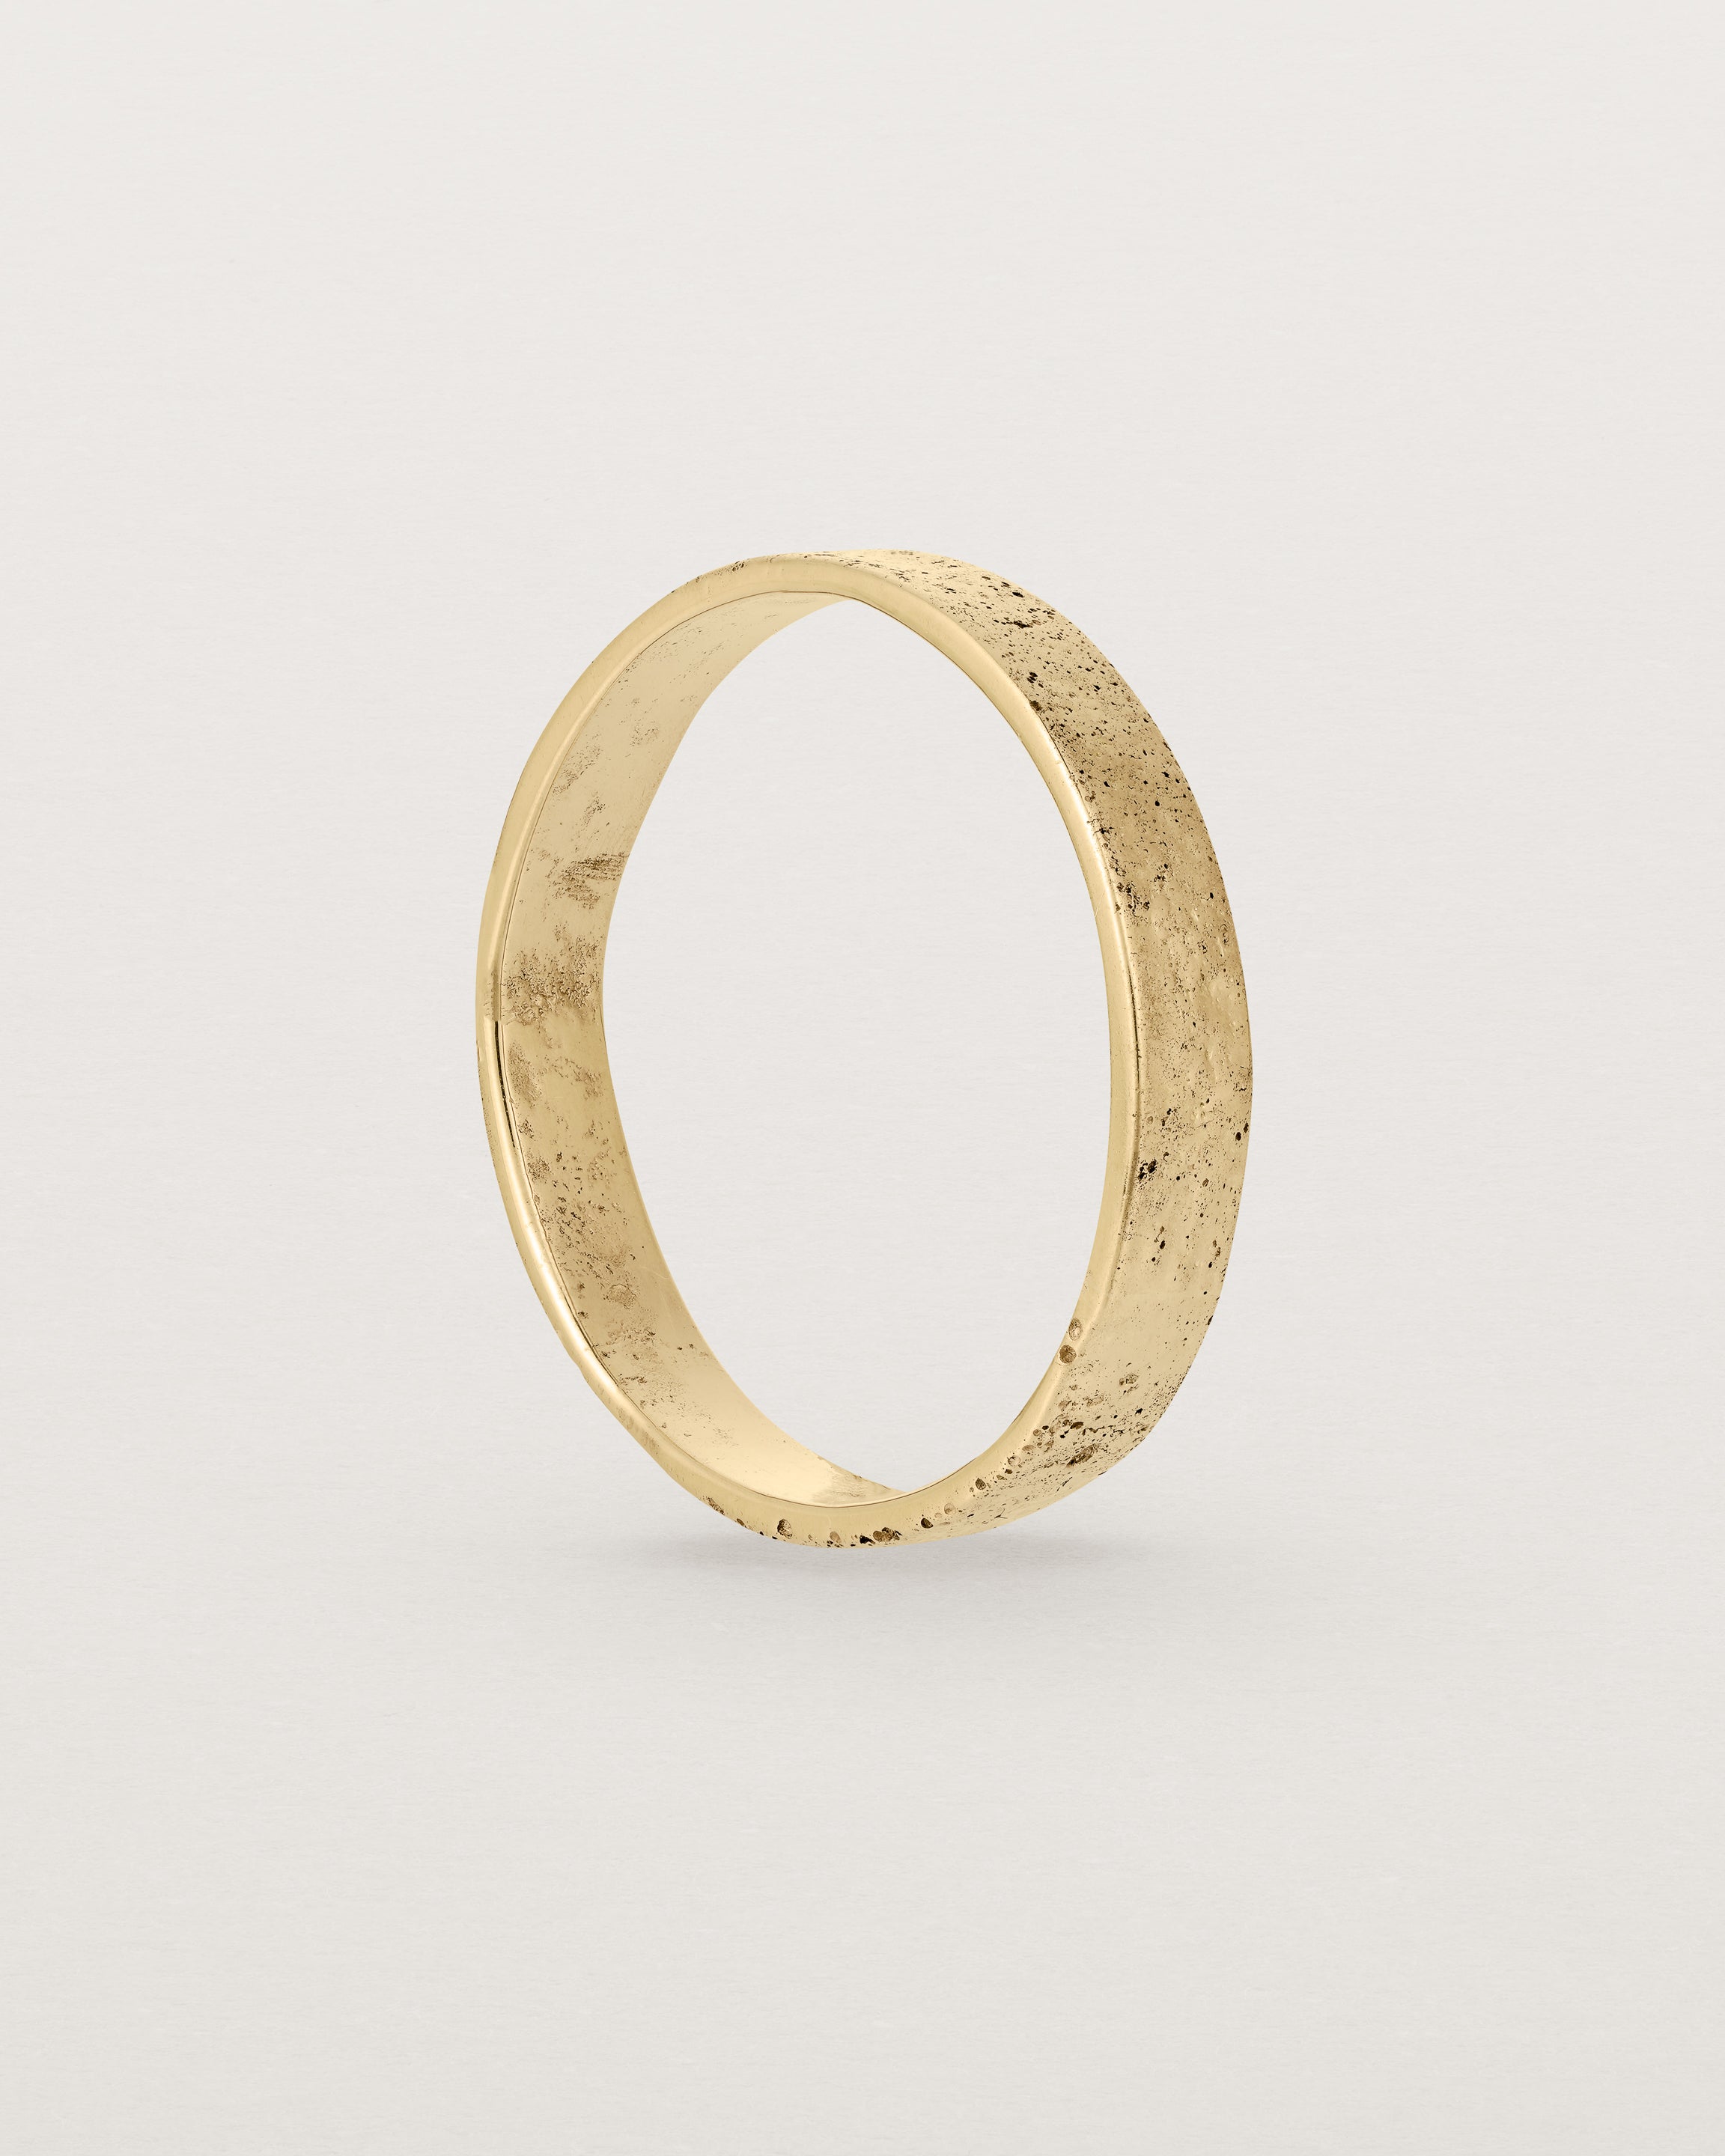 Standing view of  the Naum Stacking Ring | Fine in Yellow Gold.